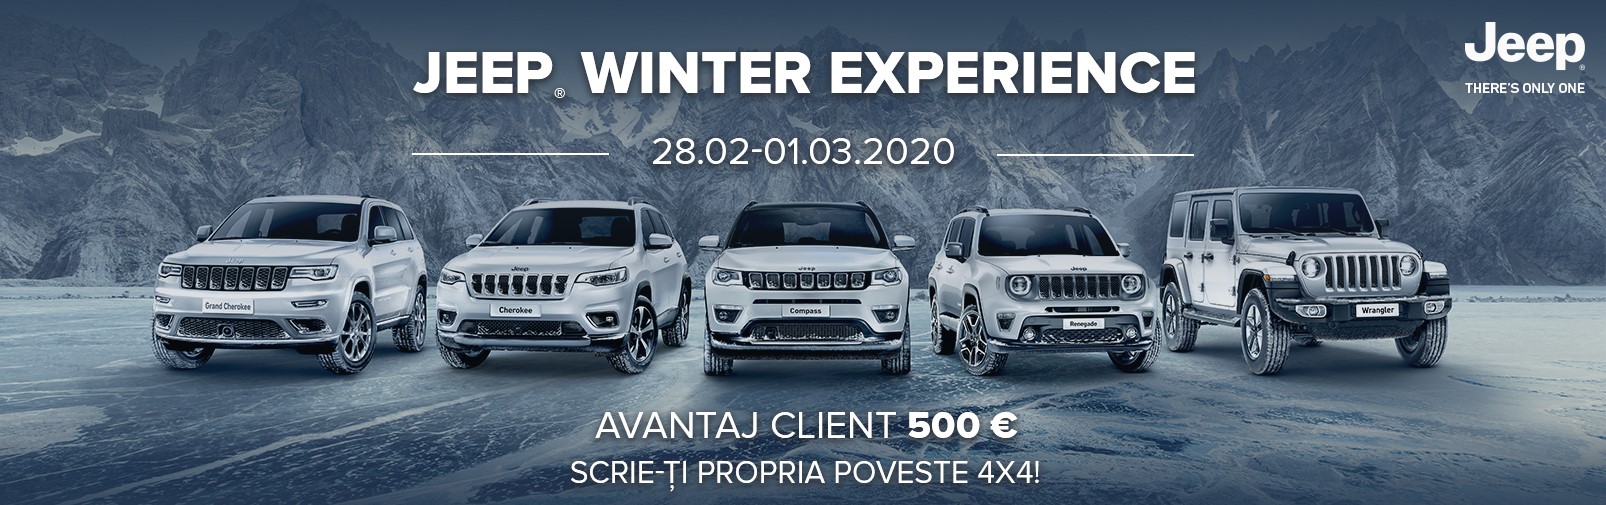 jeep winter experience - 28.02 - 01.03.2020